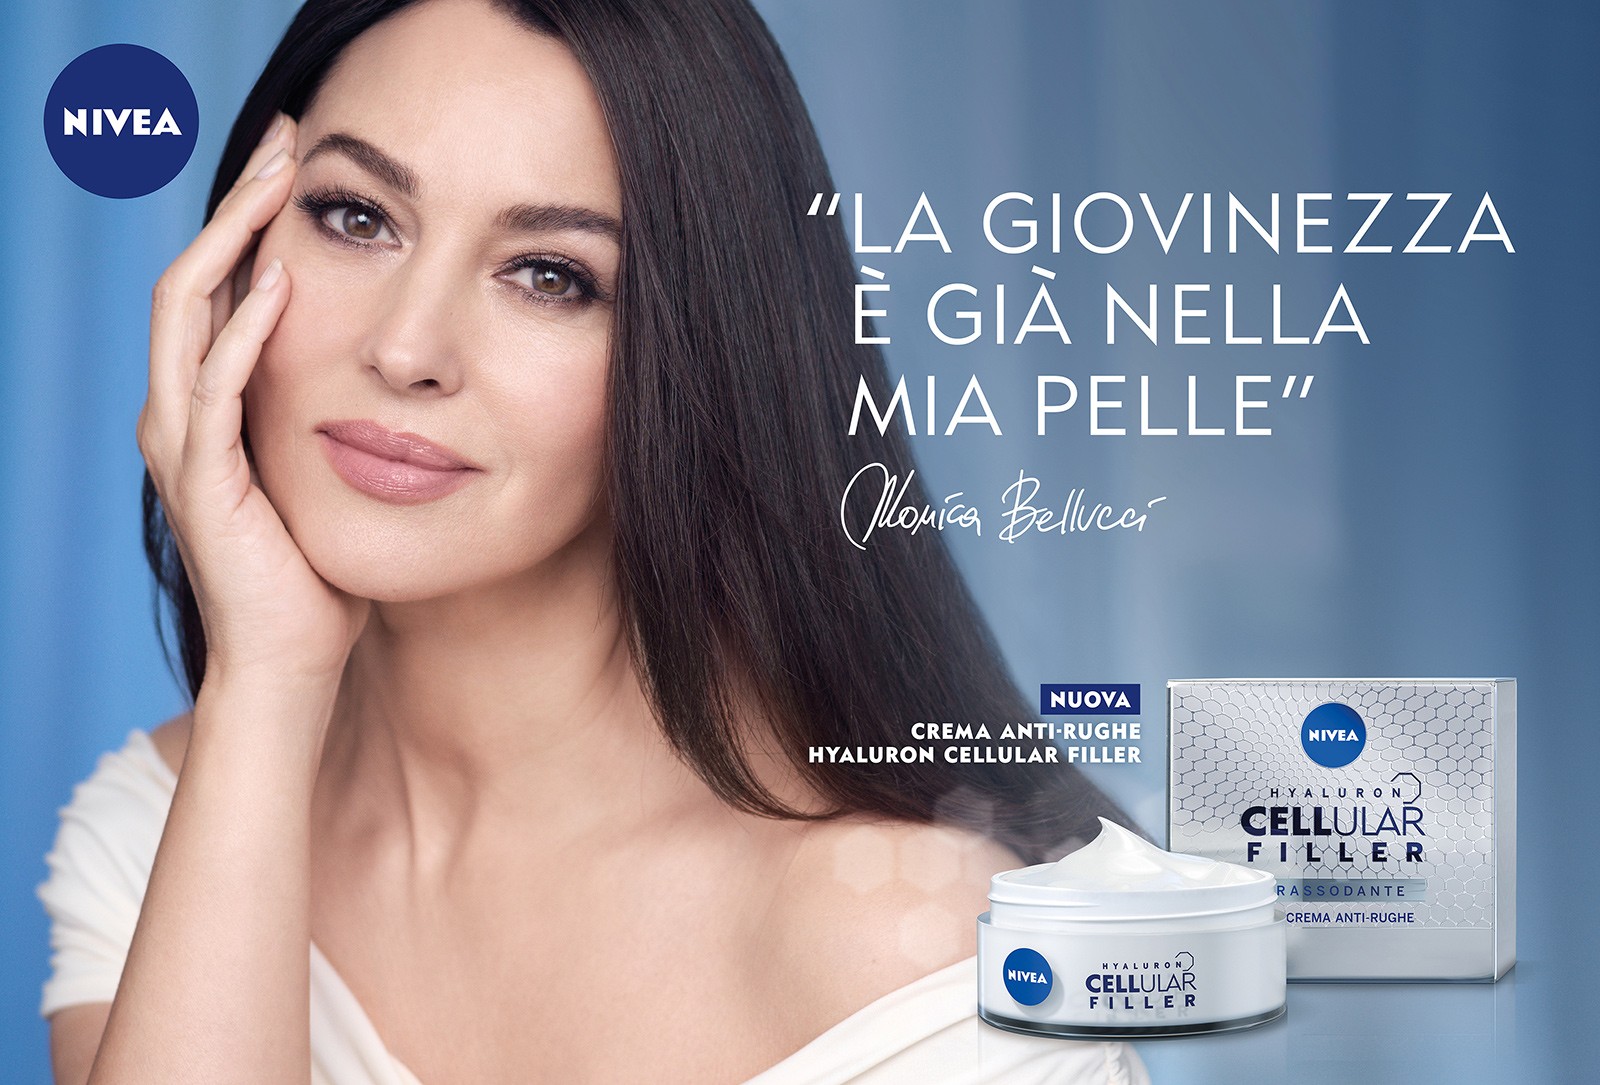 Fcb Milan And Nivea Present Beauty Without Age Starring Monica Bellucci